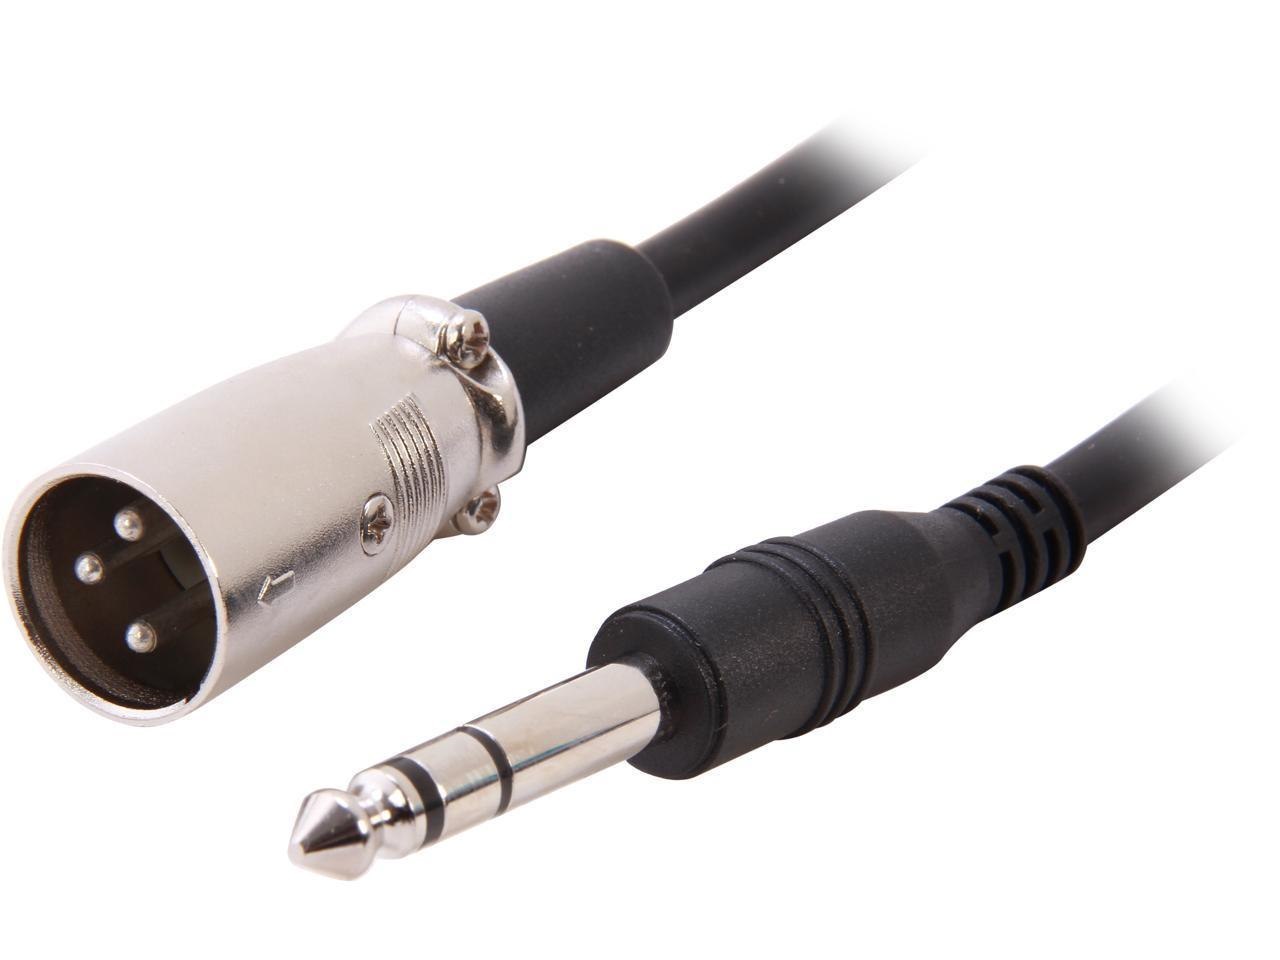 Bytecc Model Micph-10 10 FT. Micph 1/4" Stereo Microphone Plug To 3 Pin XLR Male Cable